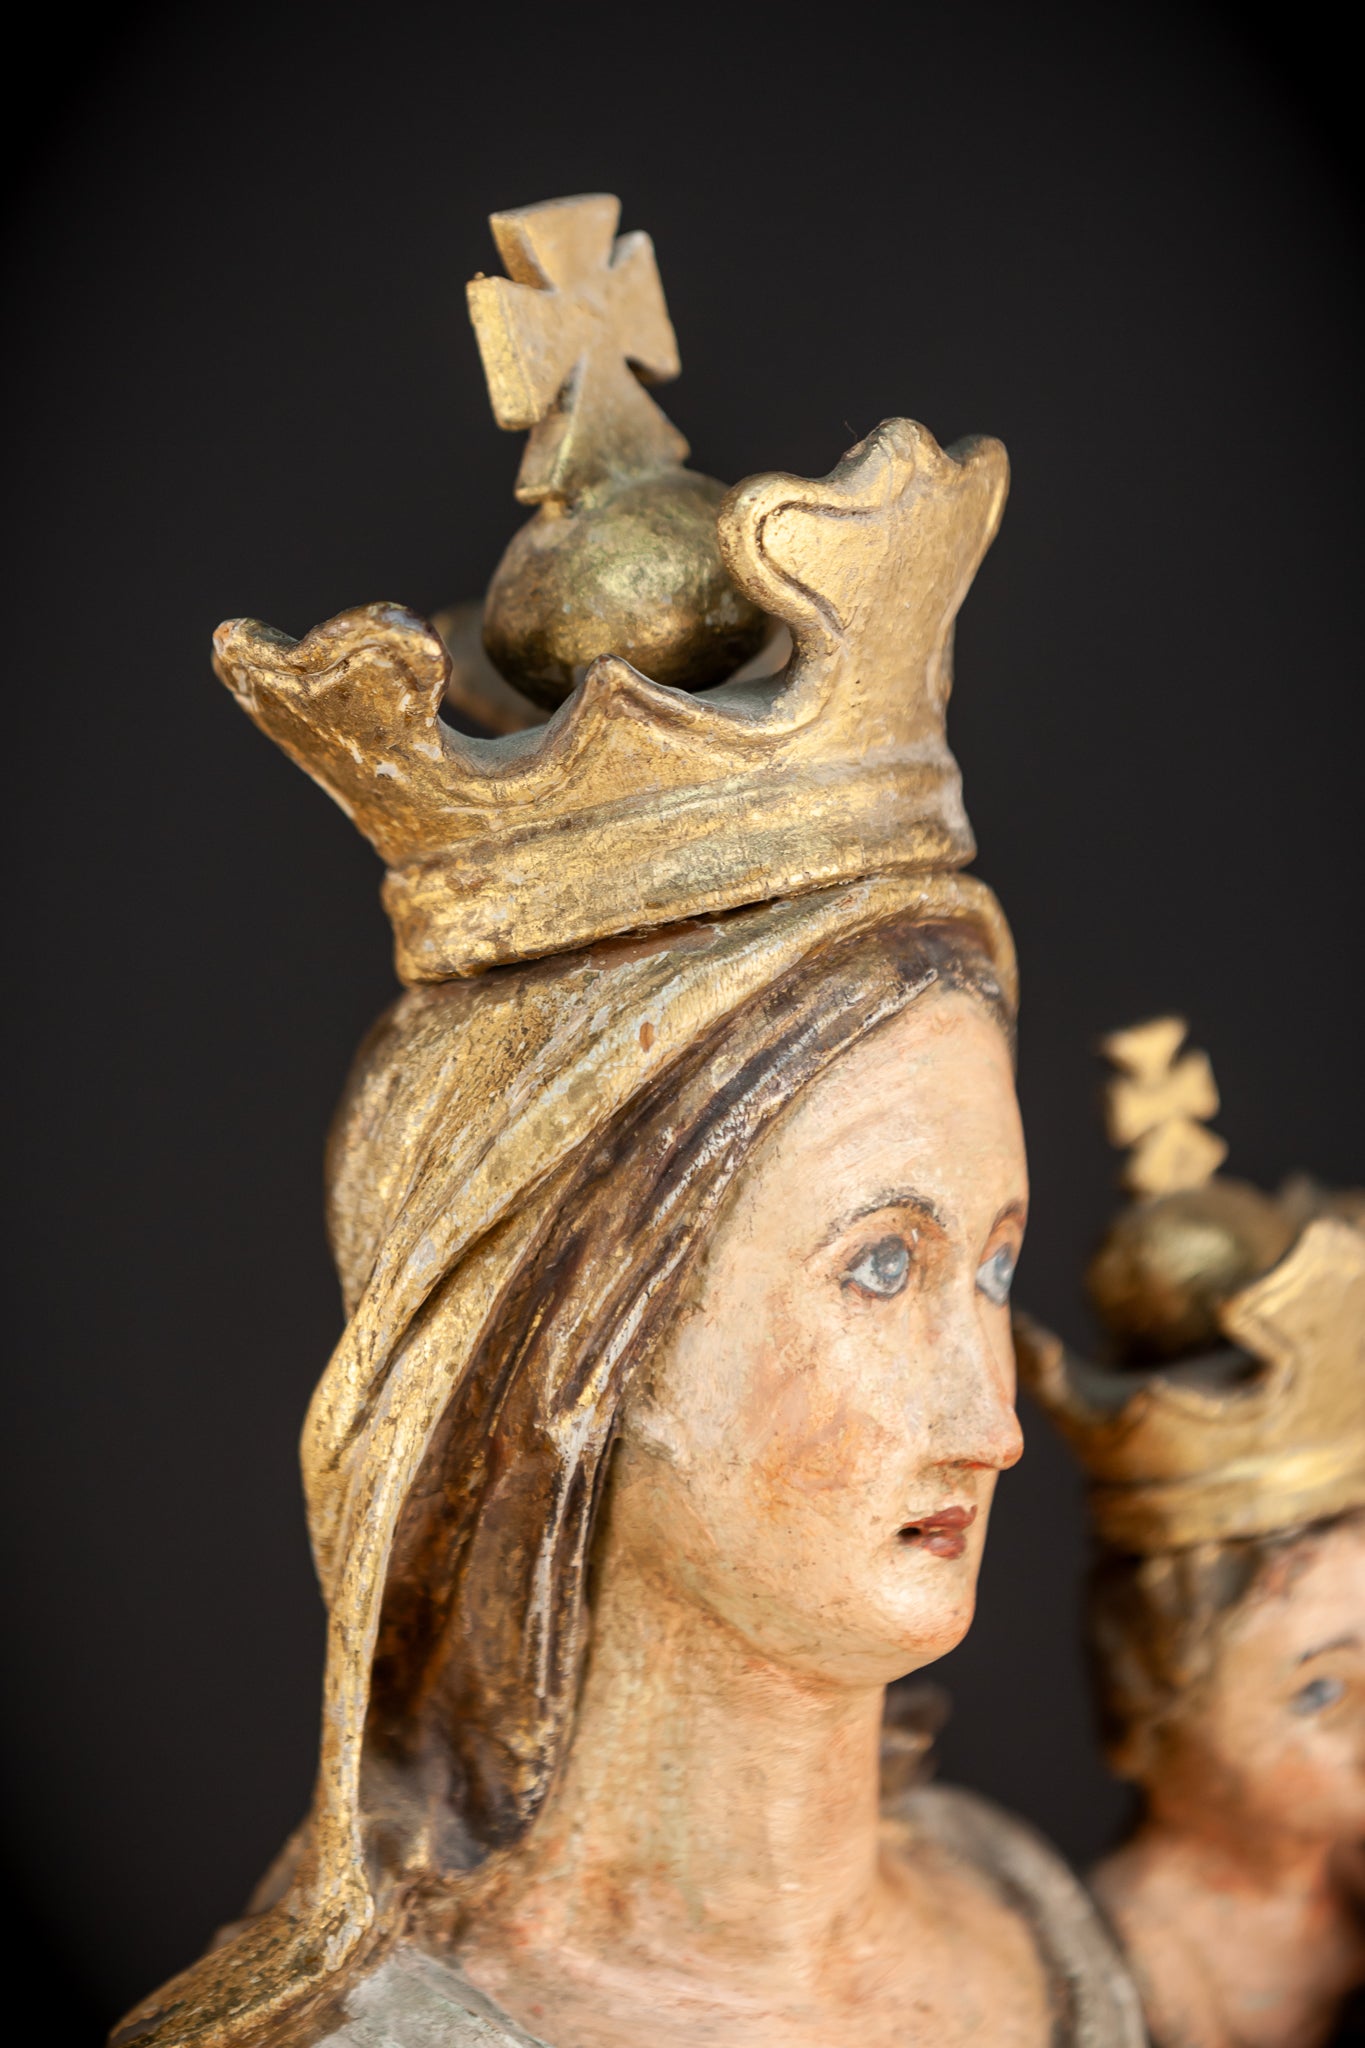 Virgin Mary with Child Jesus Wooden Sculpture | 24”/ 61 cm